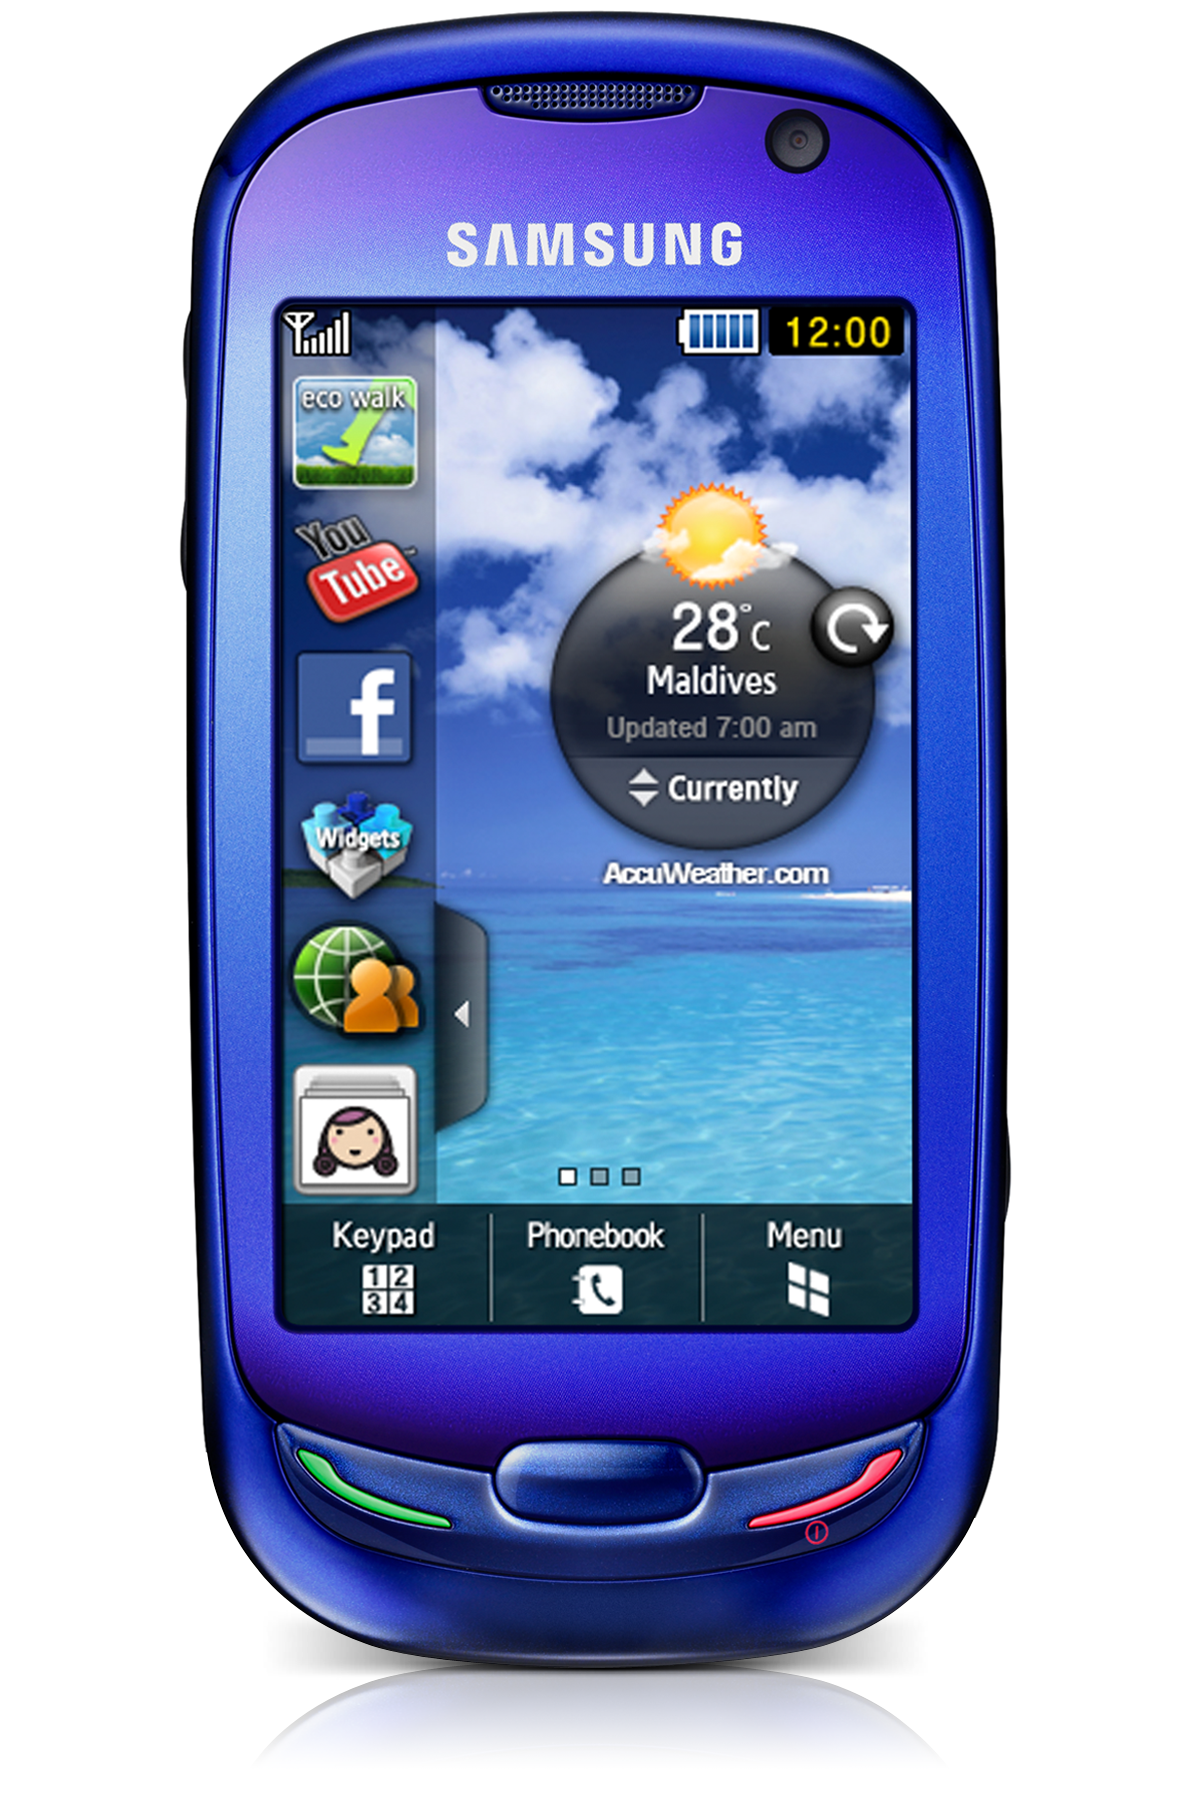 Samsung Mobile Phone Touch Screen | Samsung Support Caribbean